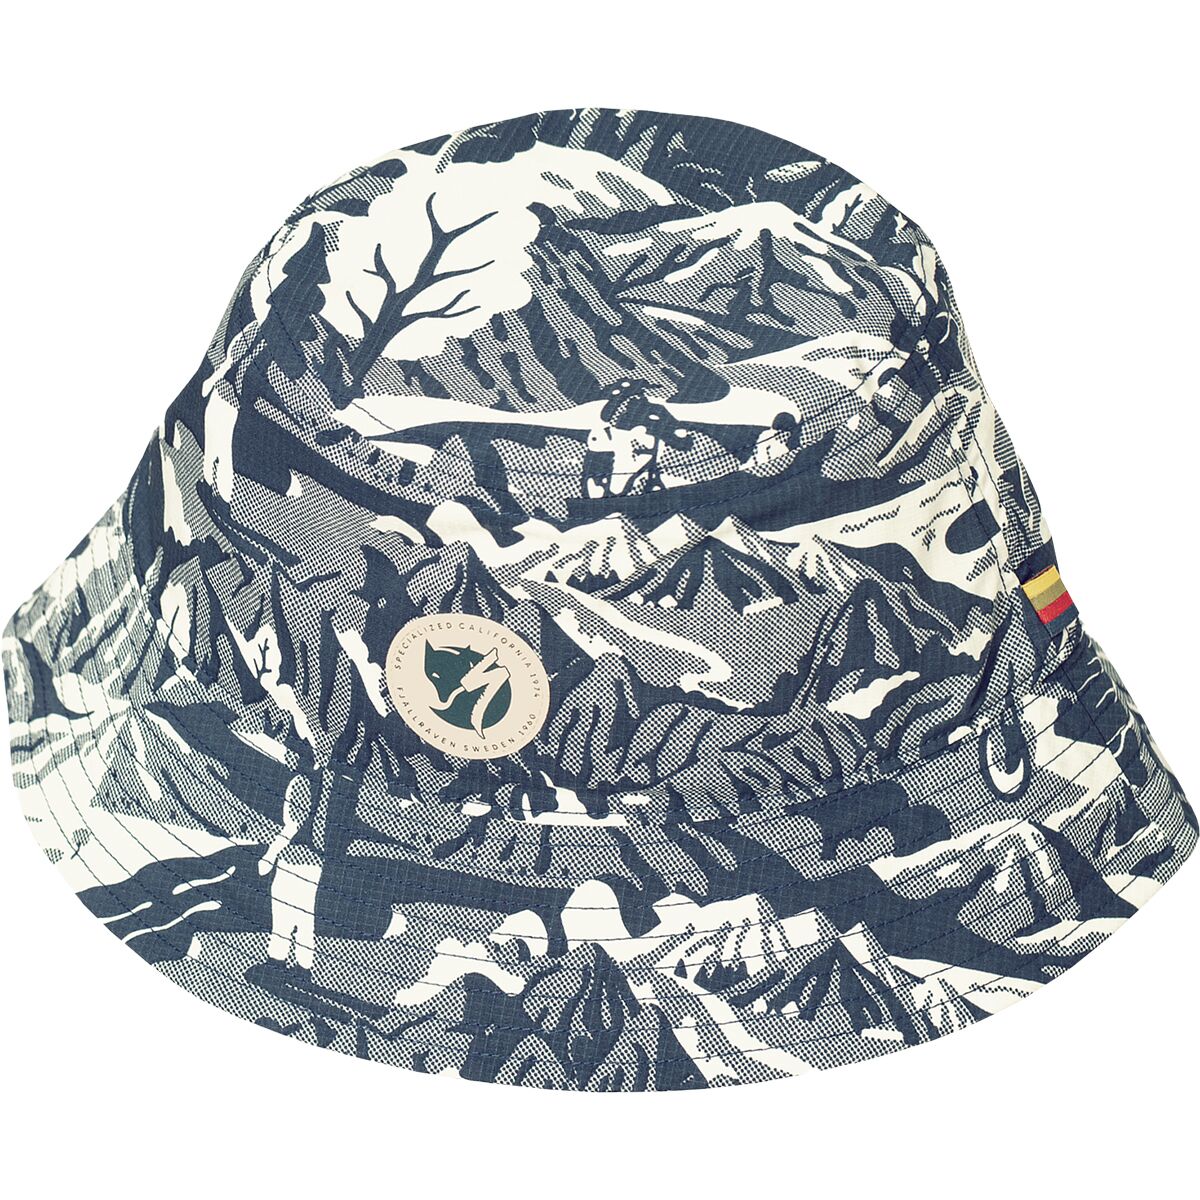 Specialized x Fjallraven Hat